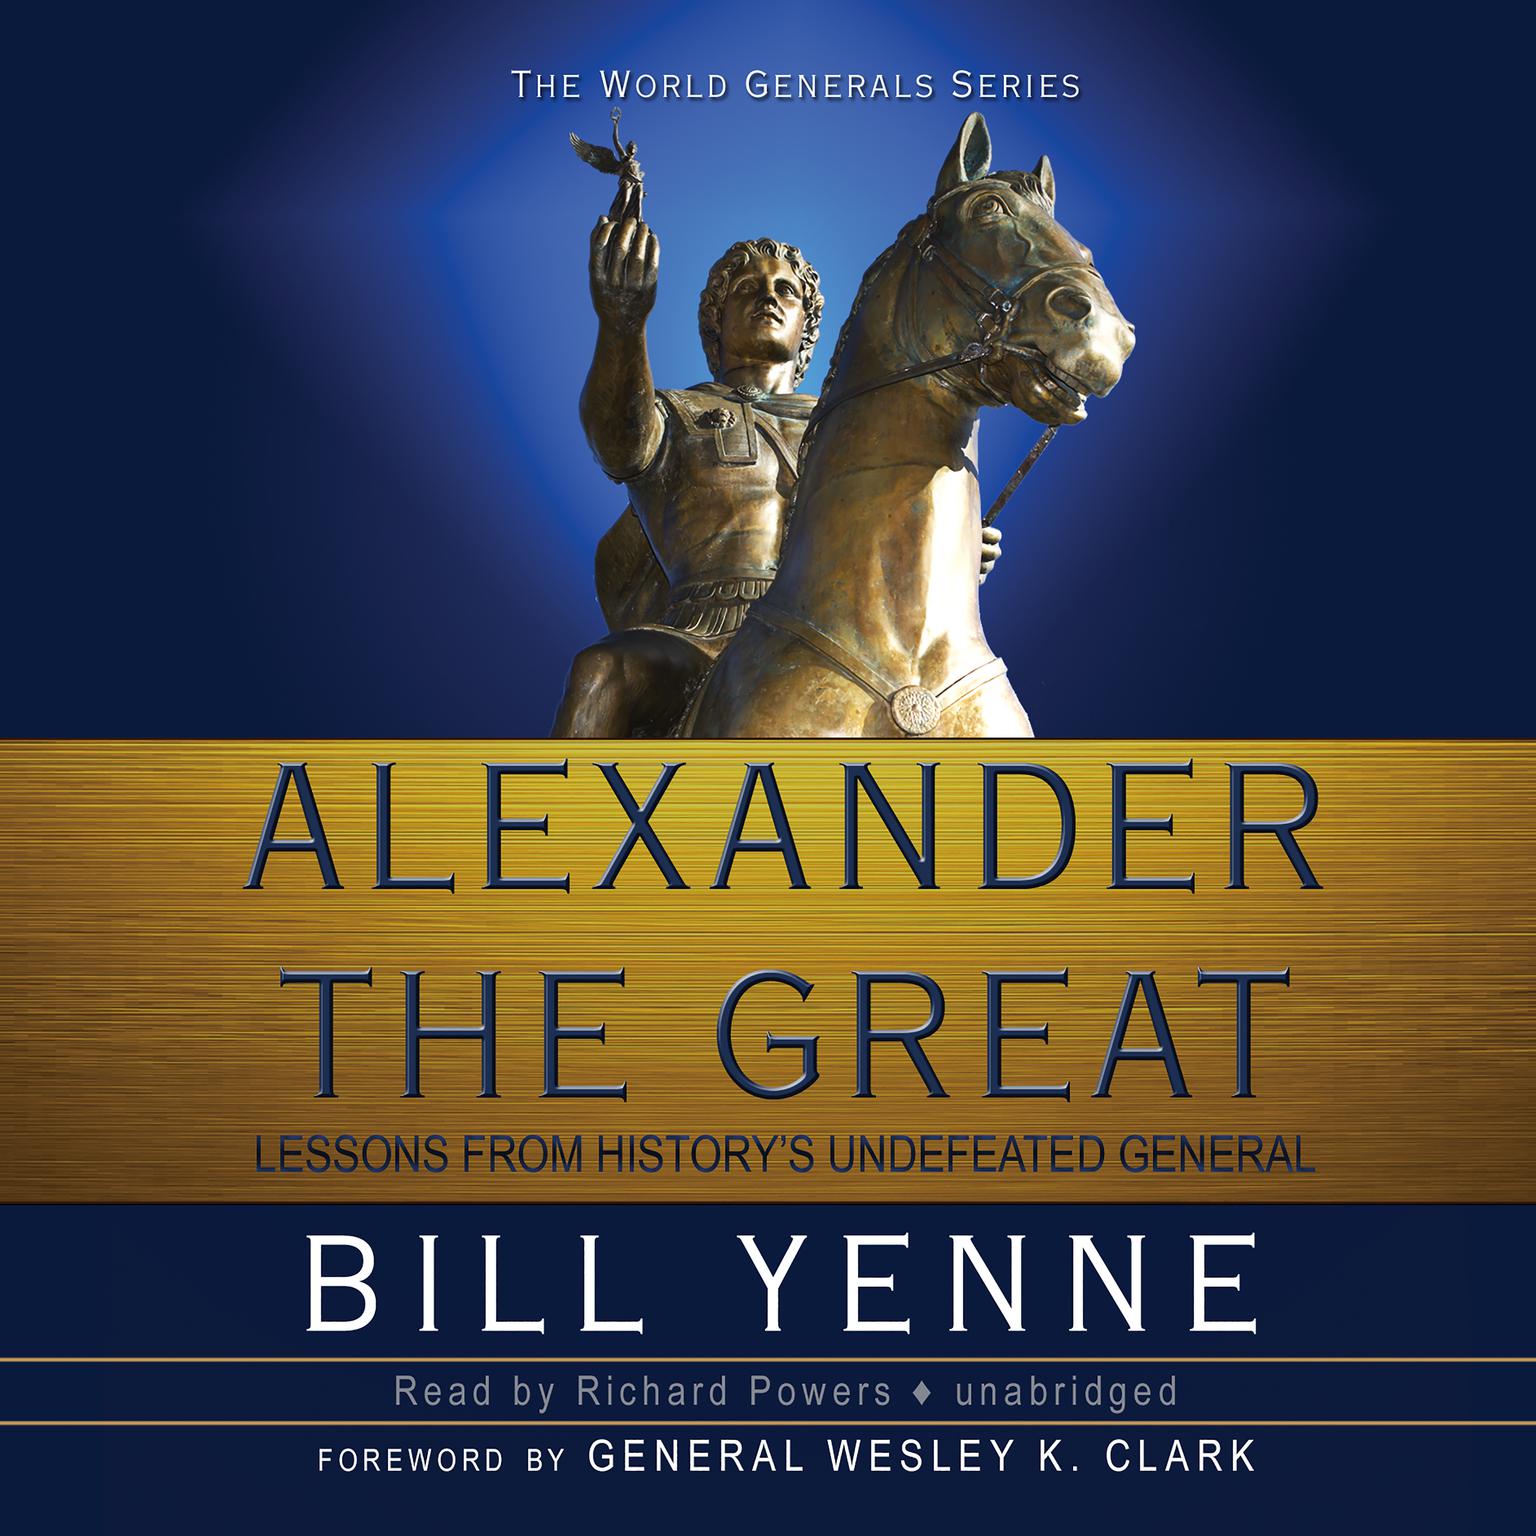 Alexander the Great: Lessons from Historys Undefeated General Audiobook, by Bill Yenne